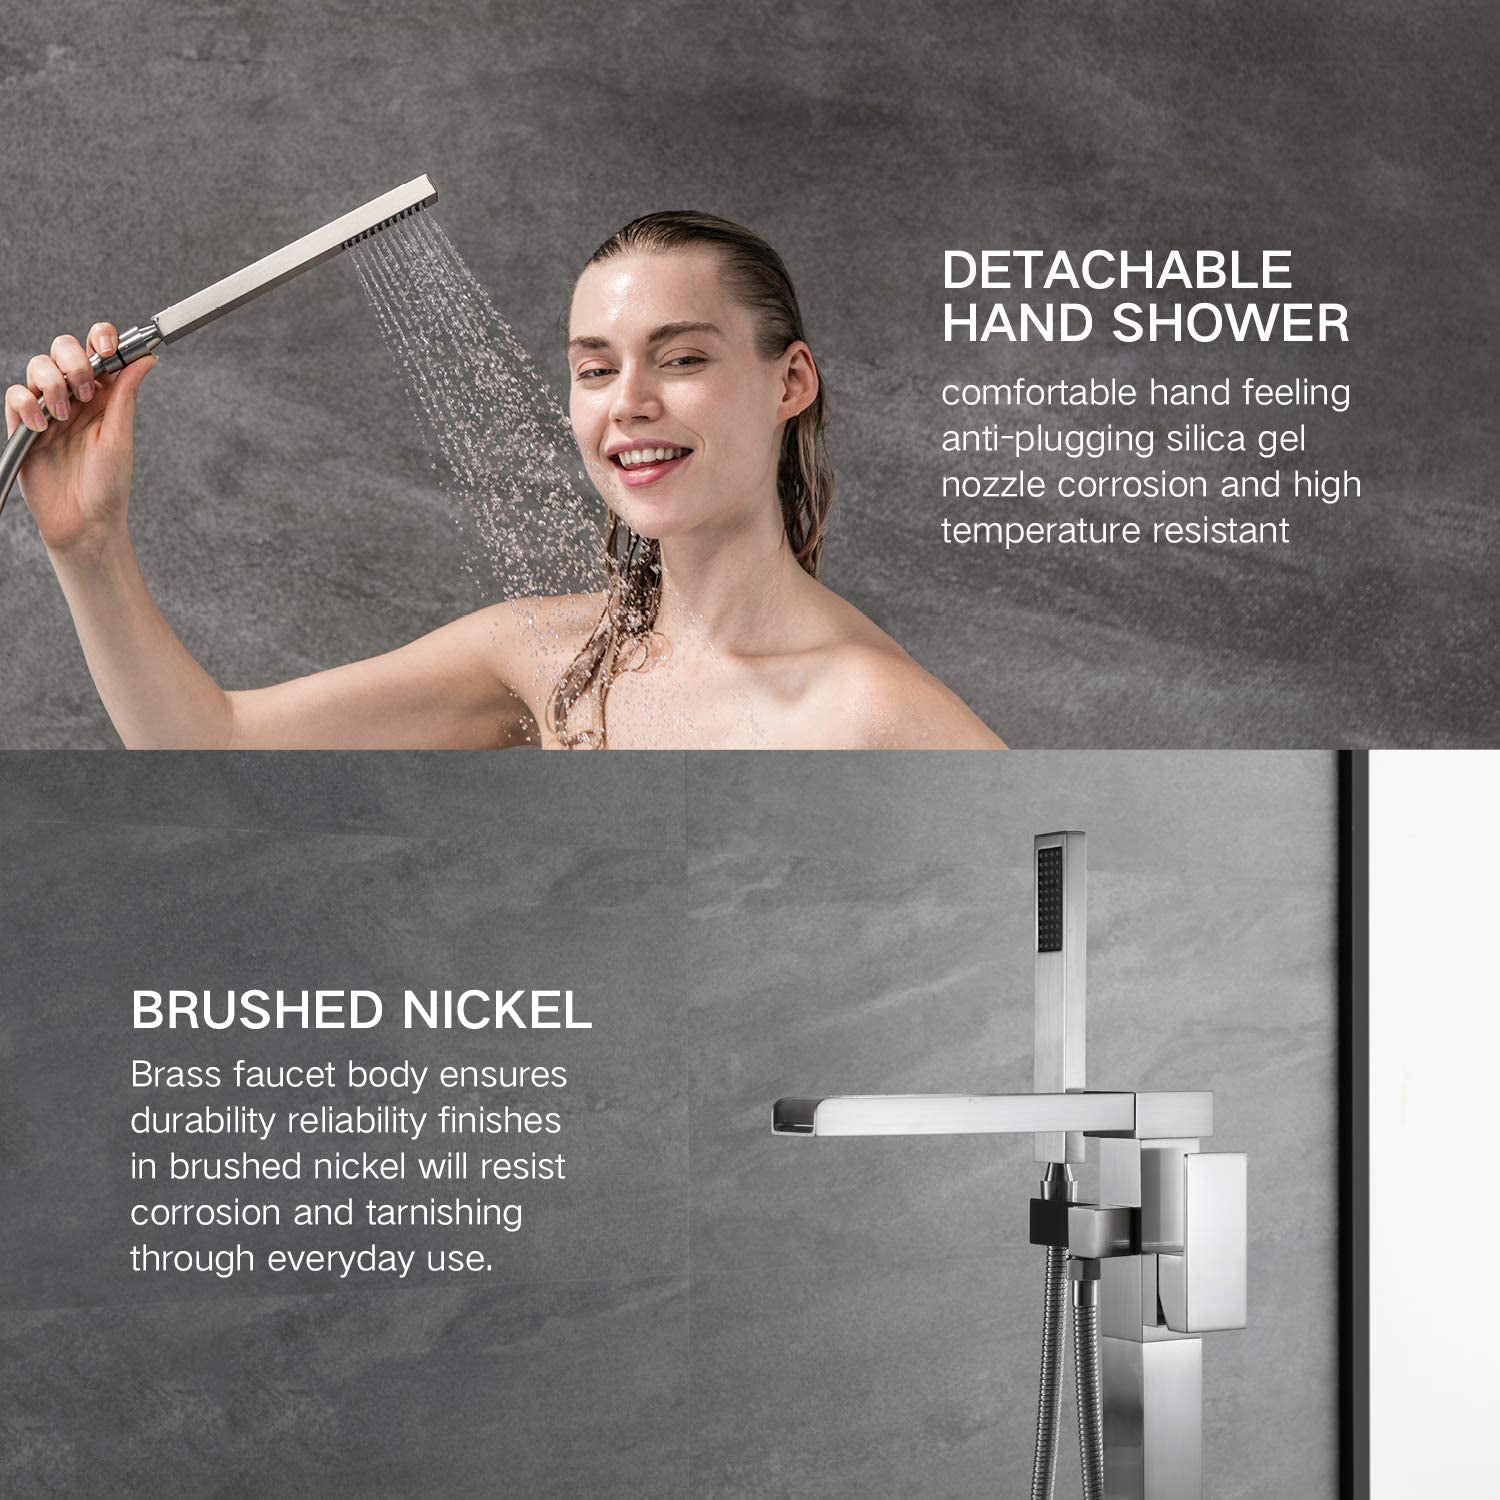 Brass Faucet Body and Detachable Handheld Shower